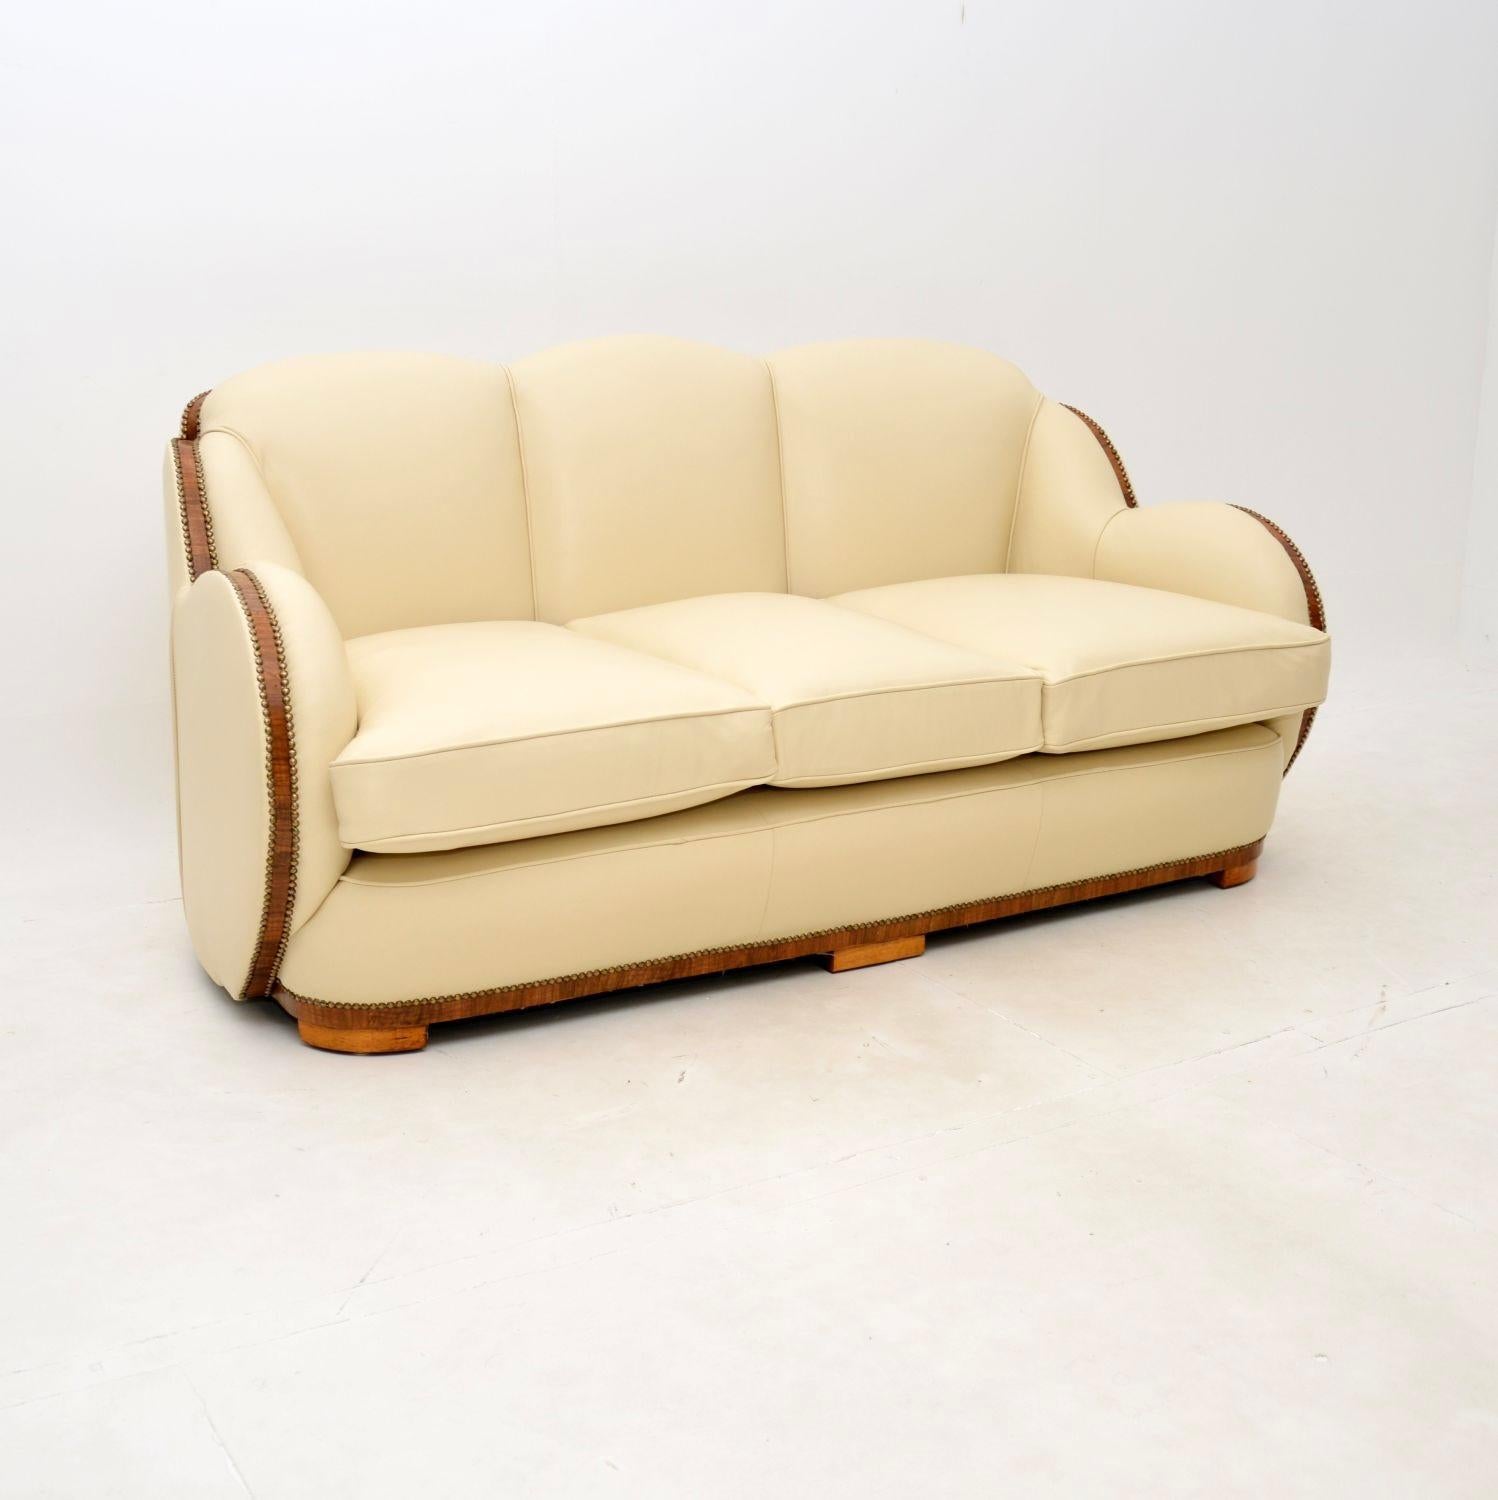 A fantastic Art Deco walnut and leather cloud back armchairs and sofa by Epstein. This was made in England, it dates from the 1920-30’s.

It is of superb quality with a gorgeous design, it is also very comfortable. The sides and back rests have a